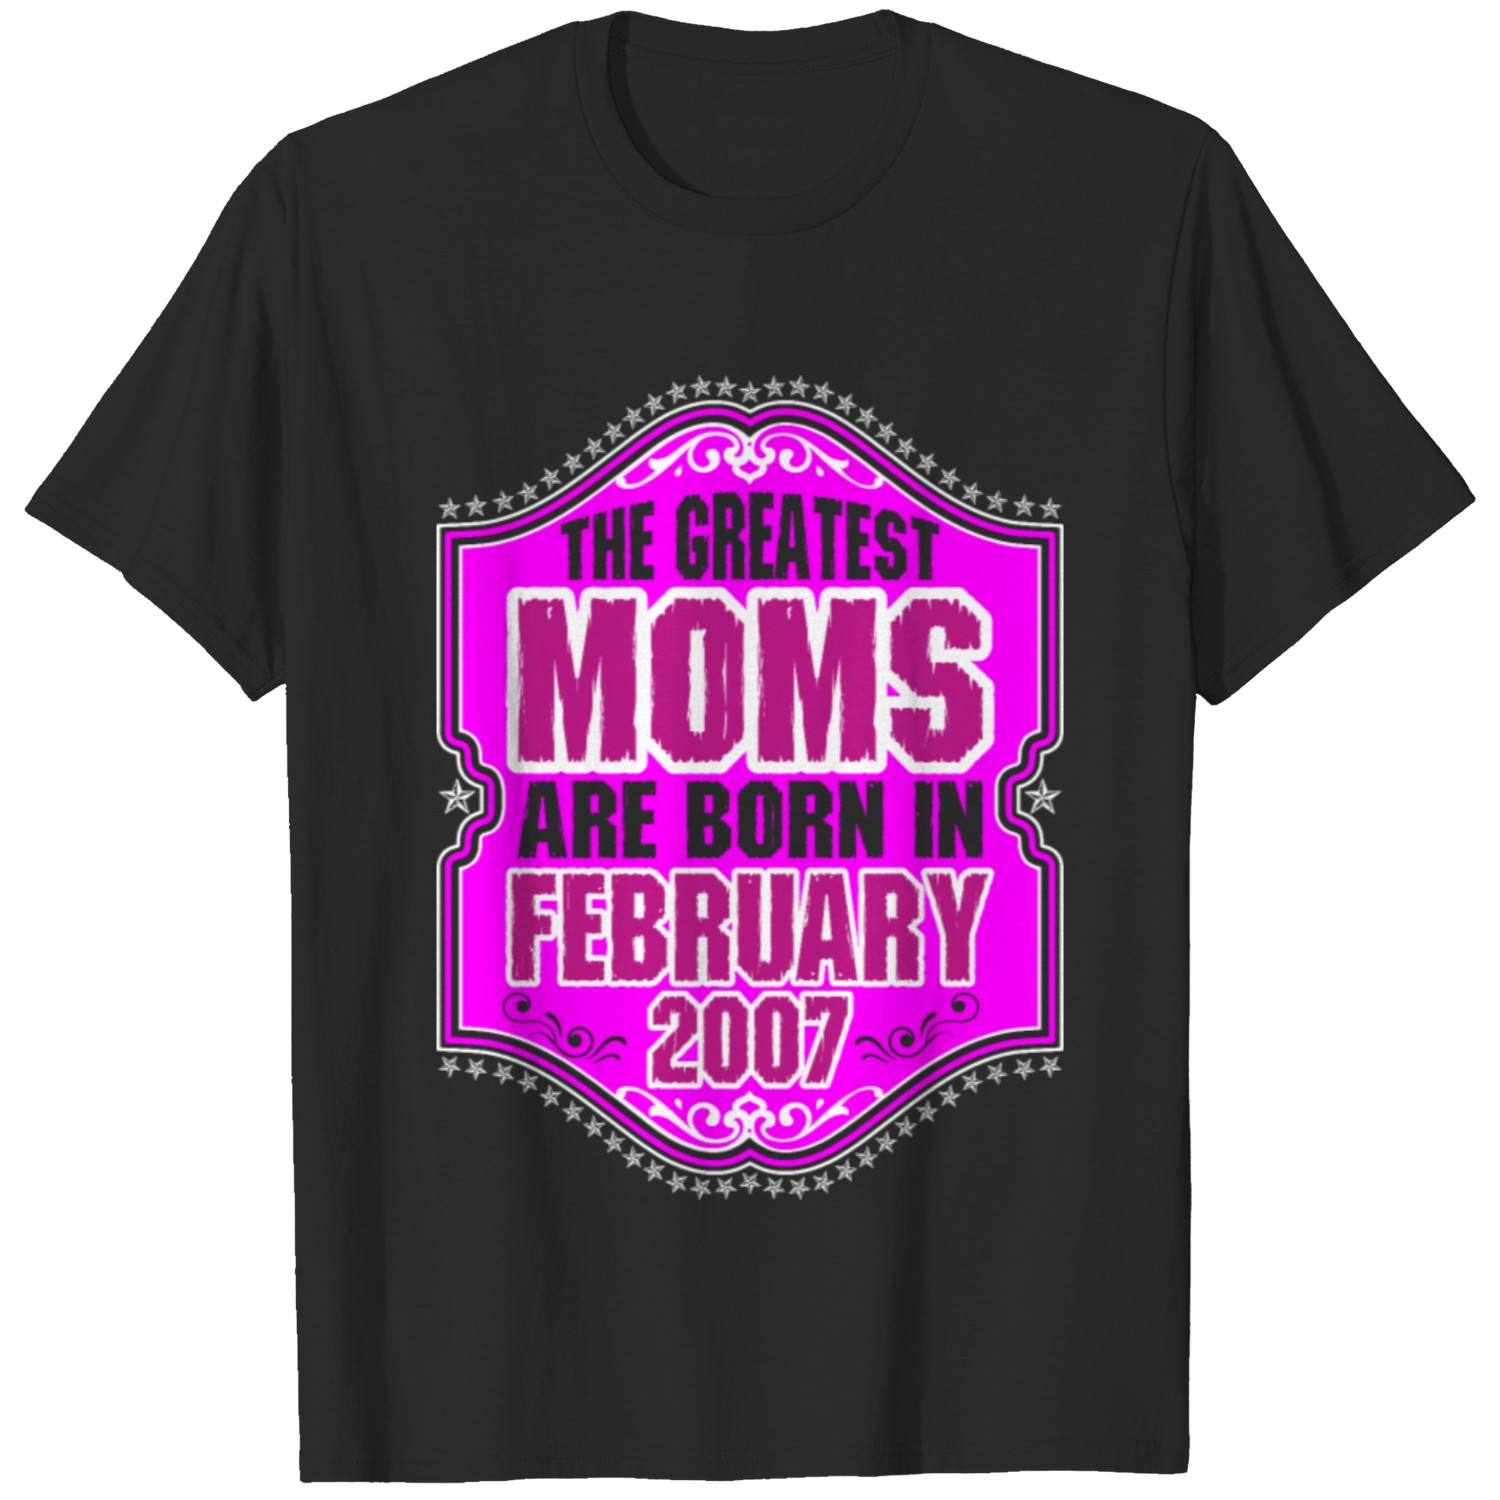 The Greatest Moms Are Born In February 2007 T-shirt